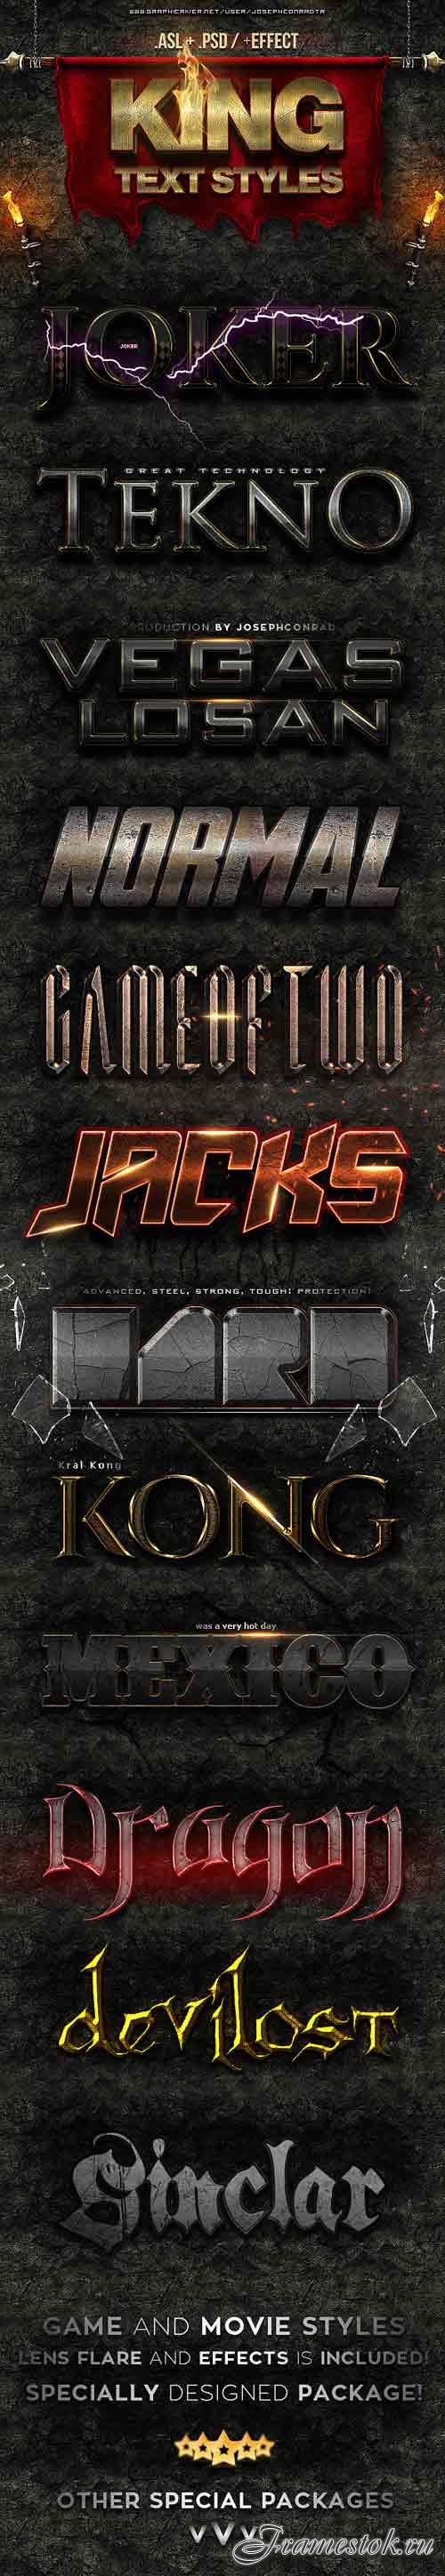 Graphicriver - King Text Styles v2 9061050